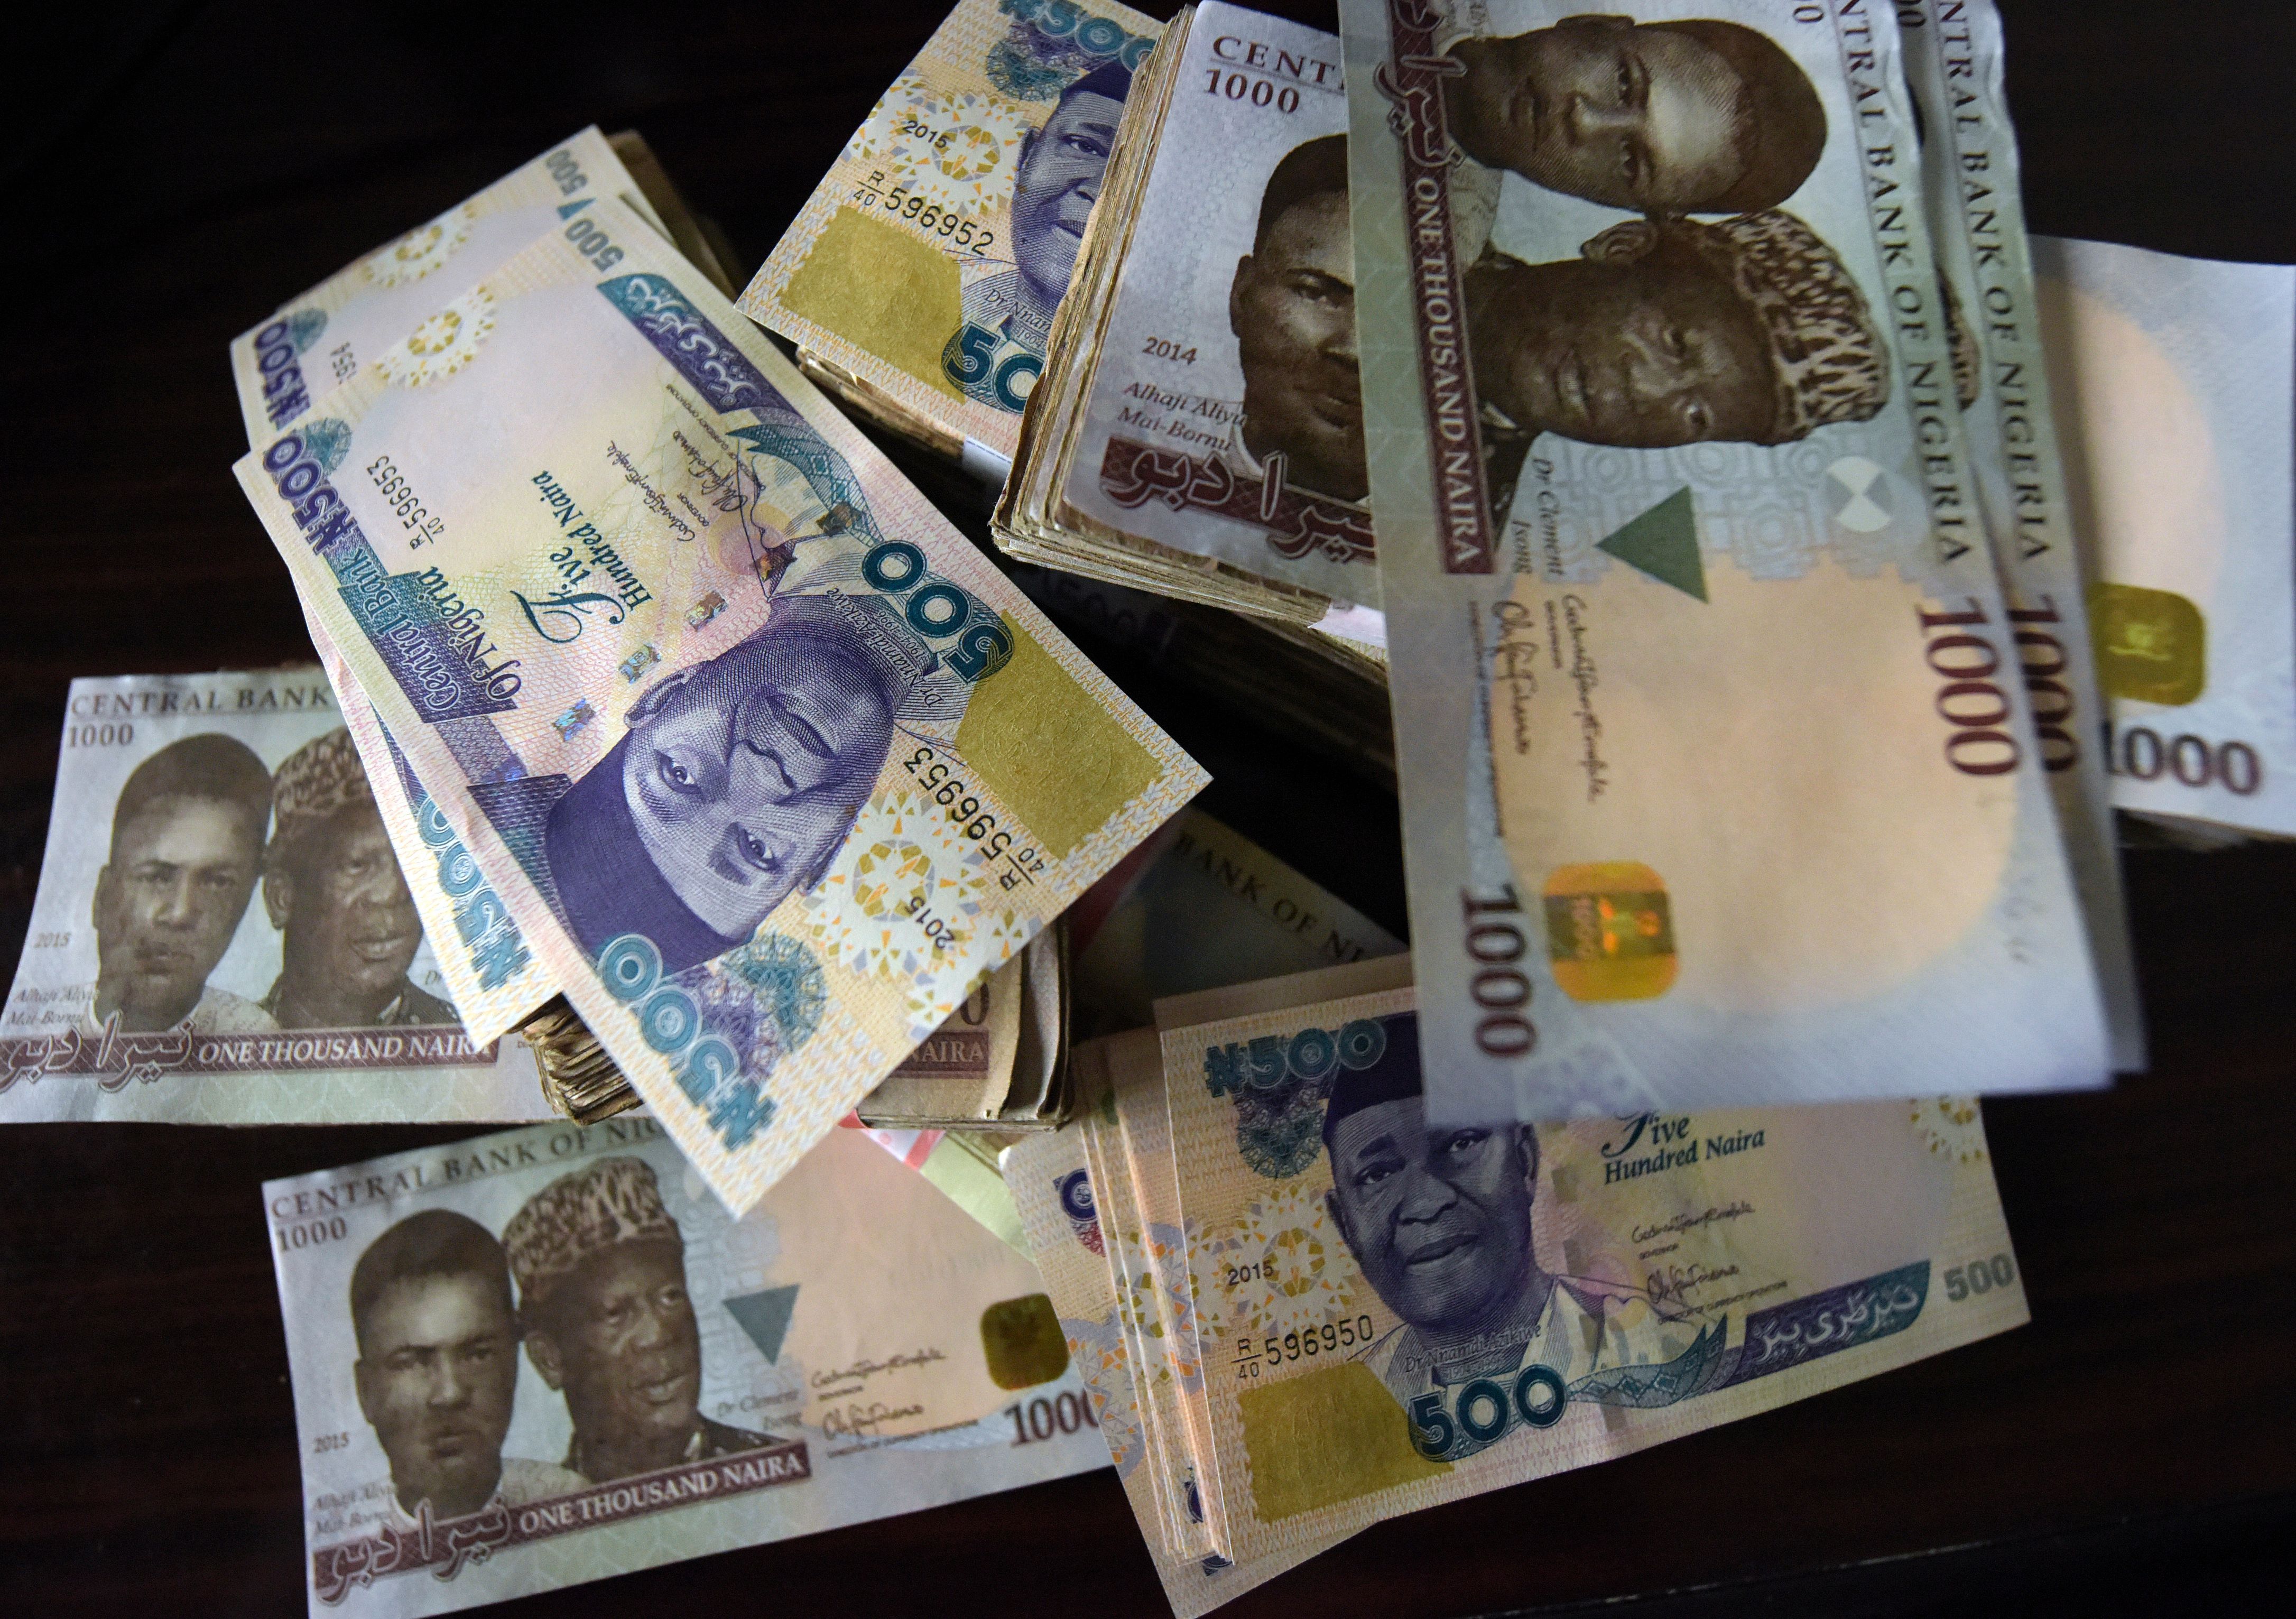 This picture taken on January 28, 2016 in Lagos shows naira banknotes, Nigeria's currency.  Nigeria's central bank governor, Godwin Emefiele, on January 26 dismissed calls to devalue the naira in his monetary policy committee statement. Instead he chose to continue propping up the currency at 197-199 naira to the dollar and maintain foreign-exchange restrictions. As a result, the naira on the black market is hovering around a record low of 305, fuelling complaints from domestic and foreign businesses who can't access dollars required for imports.  / AFP / PIUS UTOMI EKPEI        (Photo credit should read PIUS UTOMI EKPEI/AFP/Getty Images)